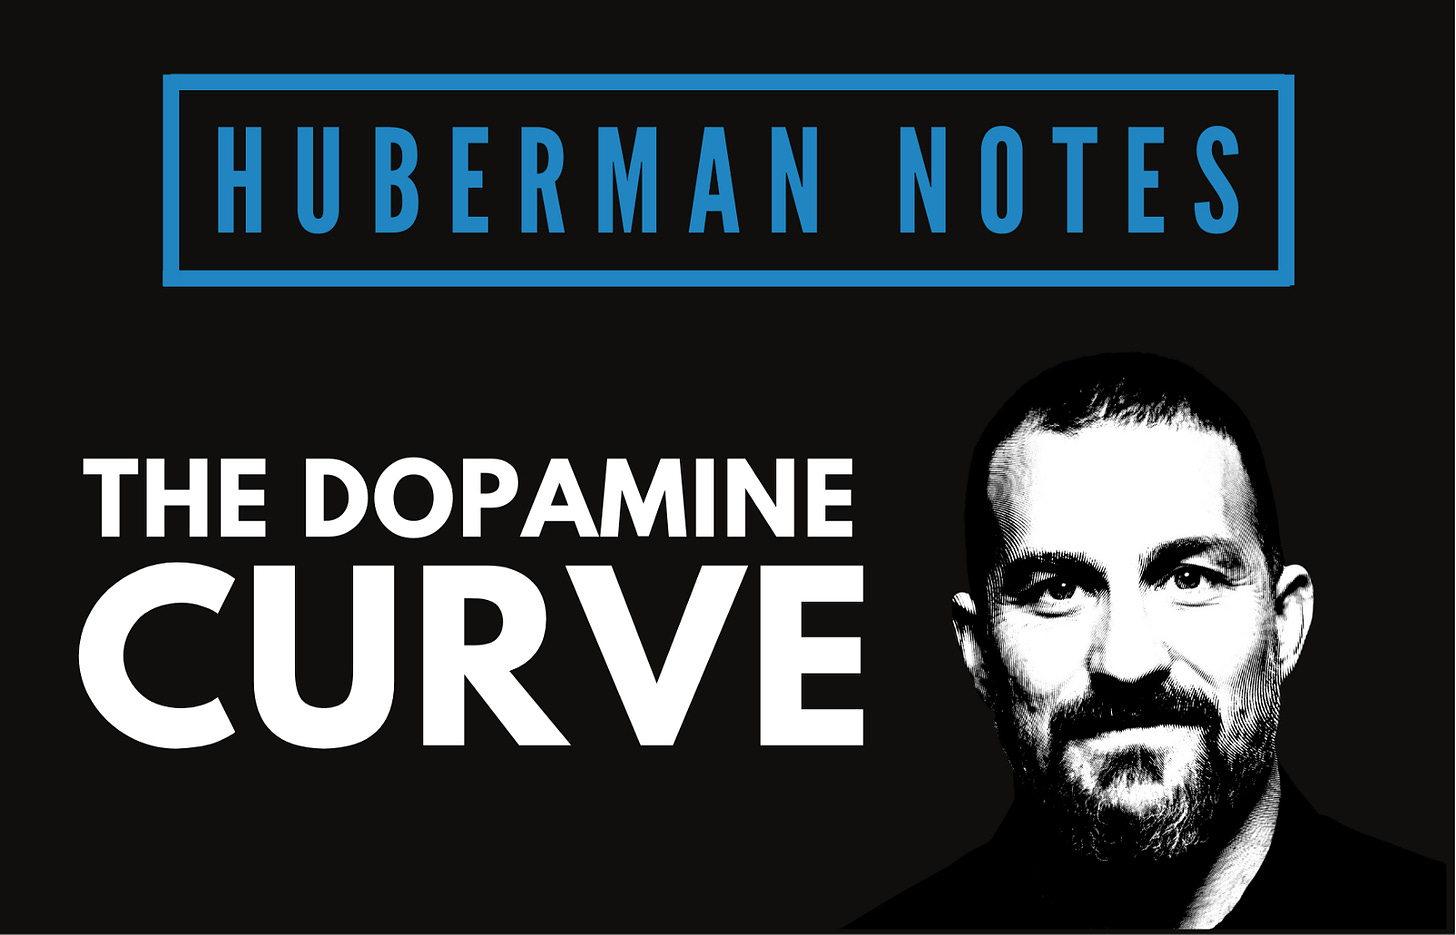 Header image with text: The dopamine curve. Outline of andrew huberman